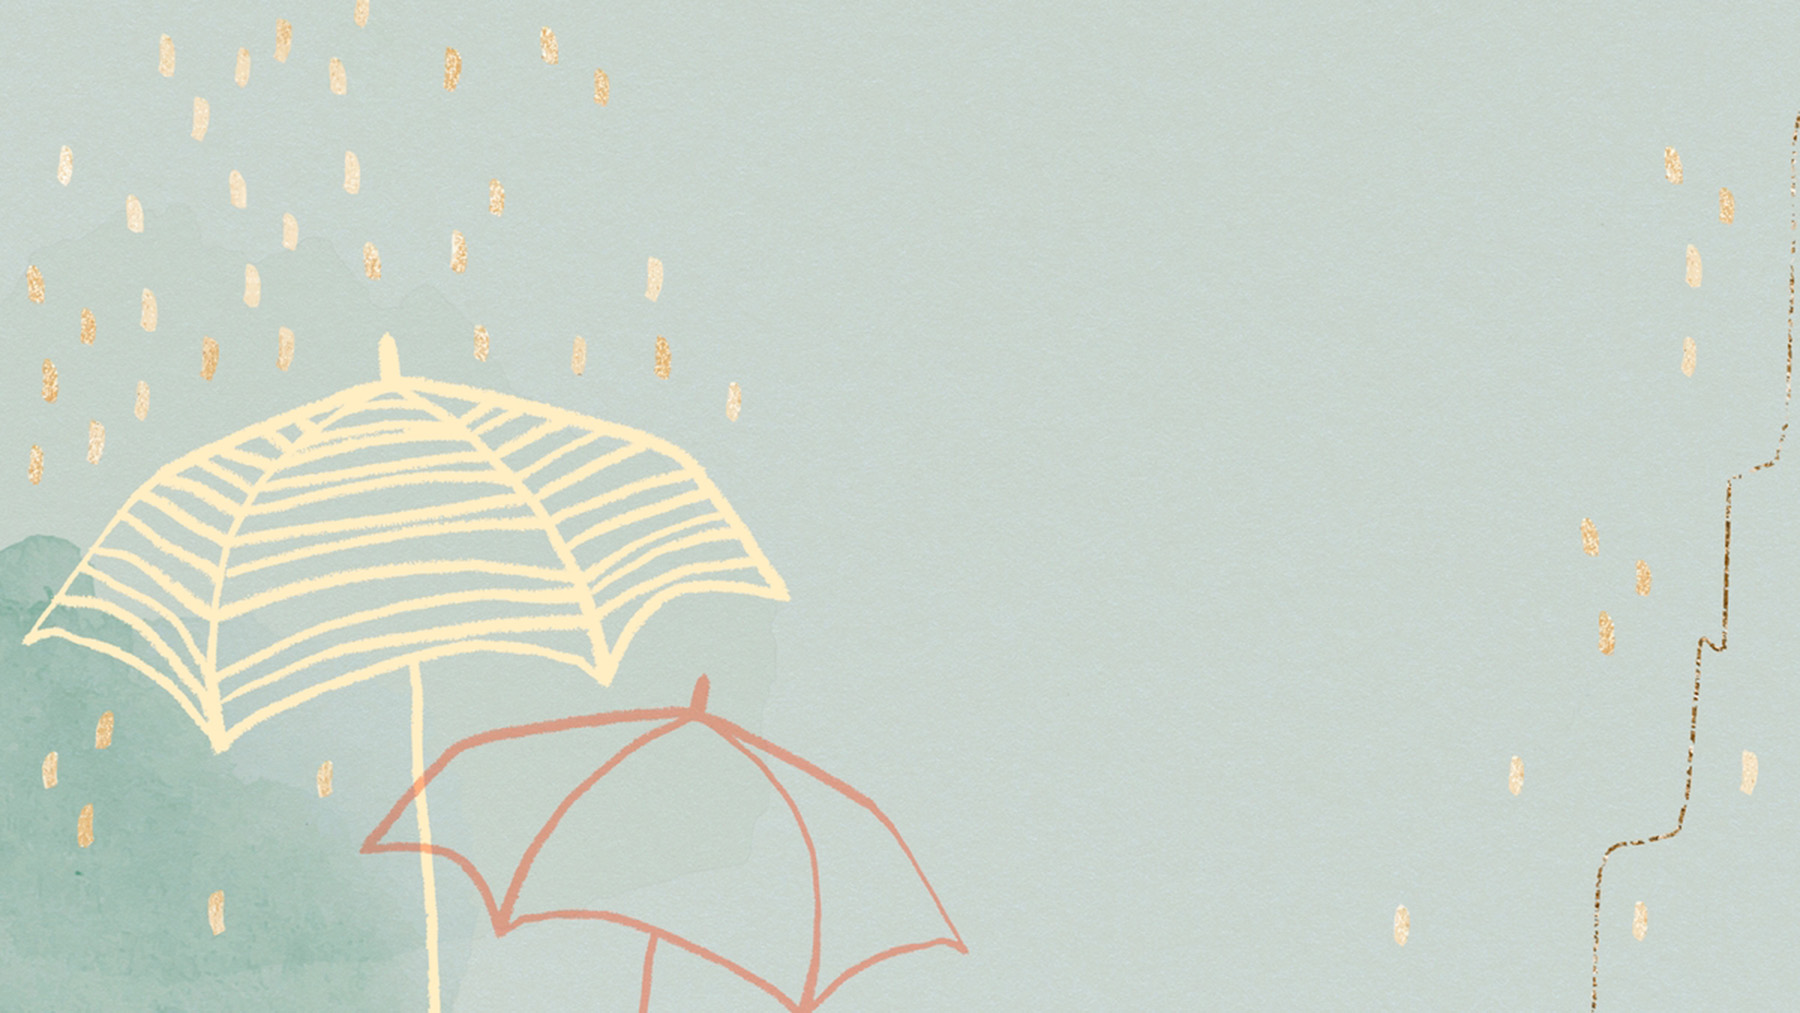 Green watercolor with illustrated rain and umbrellas in cream, orange, and gold (Image by RawPixel.com)